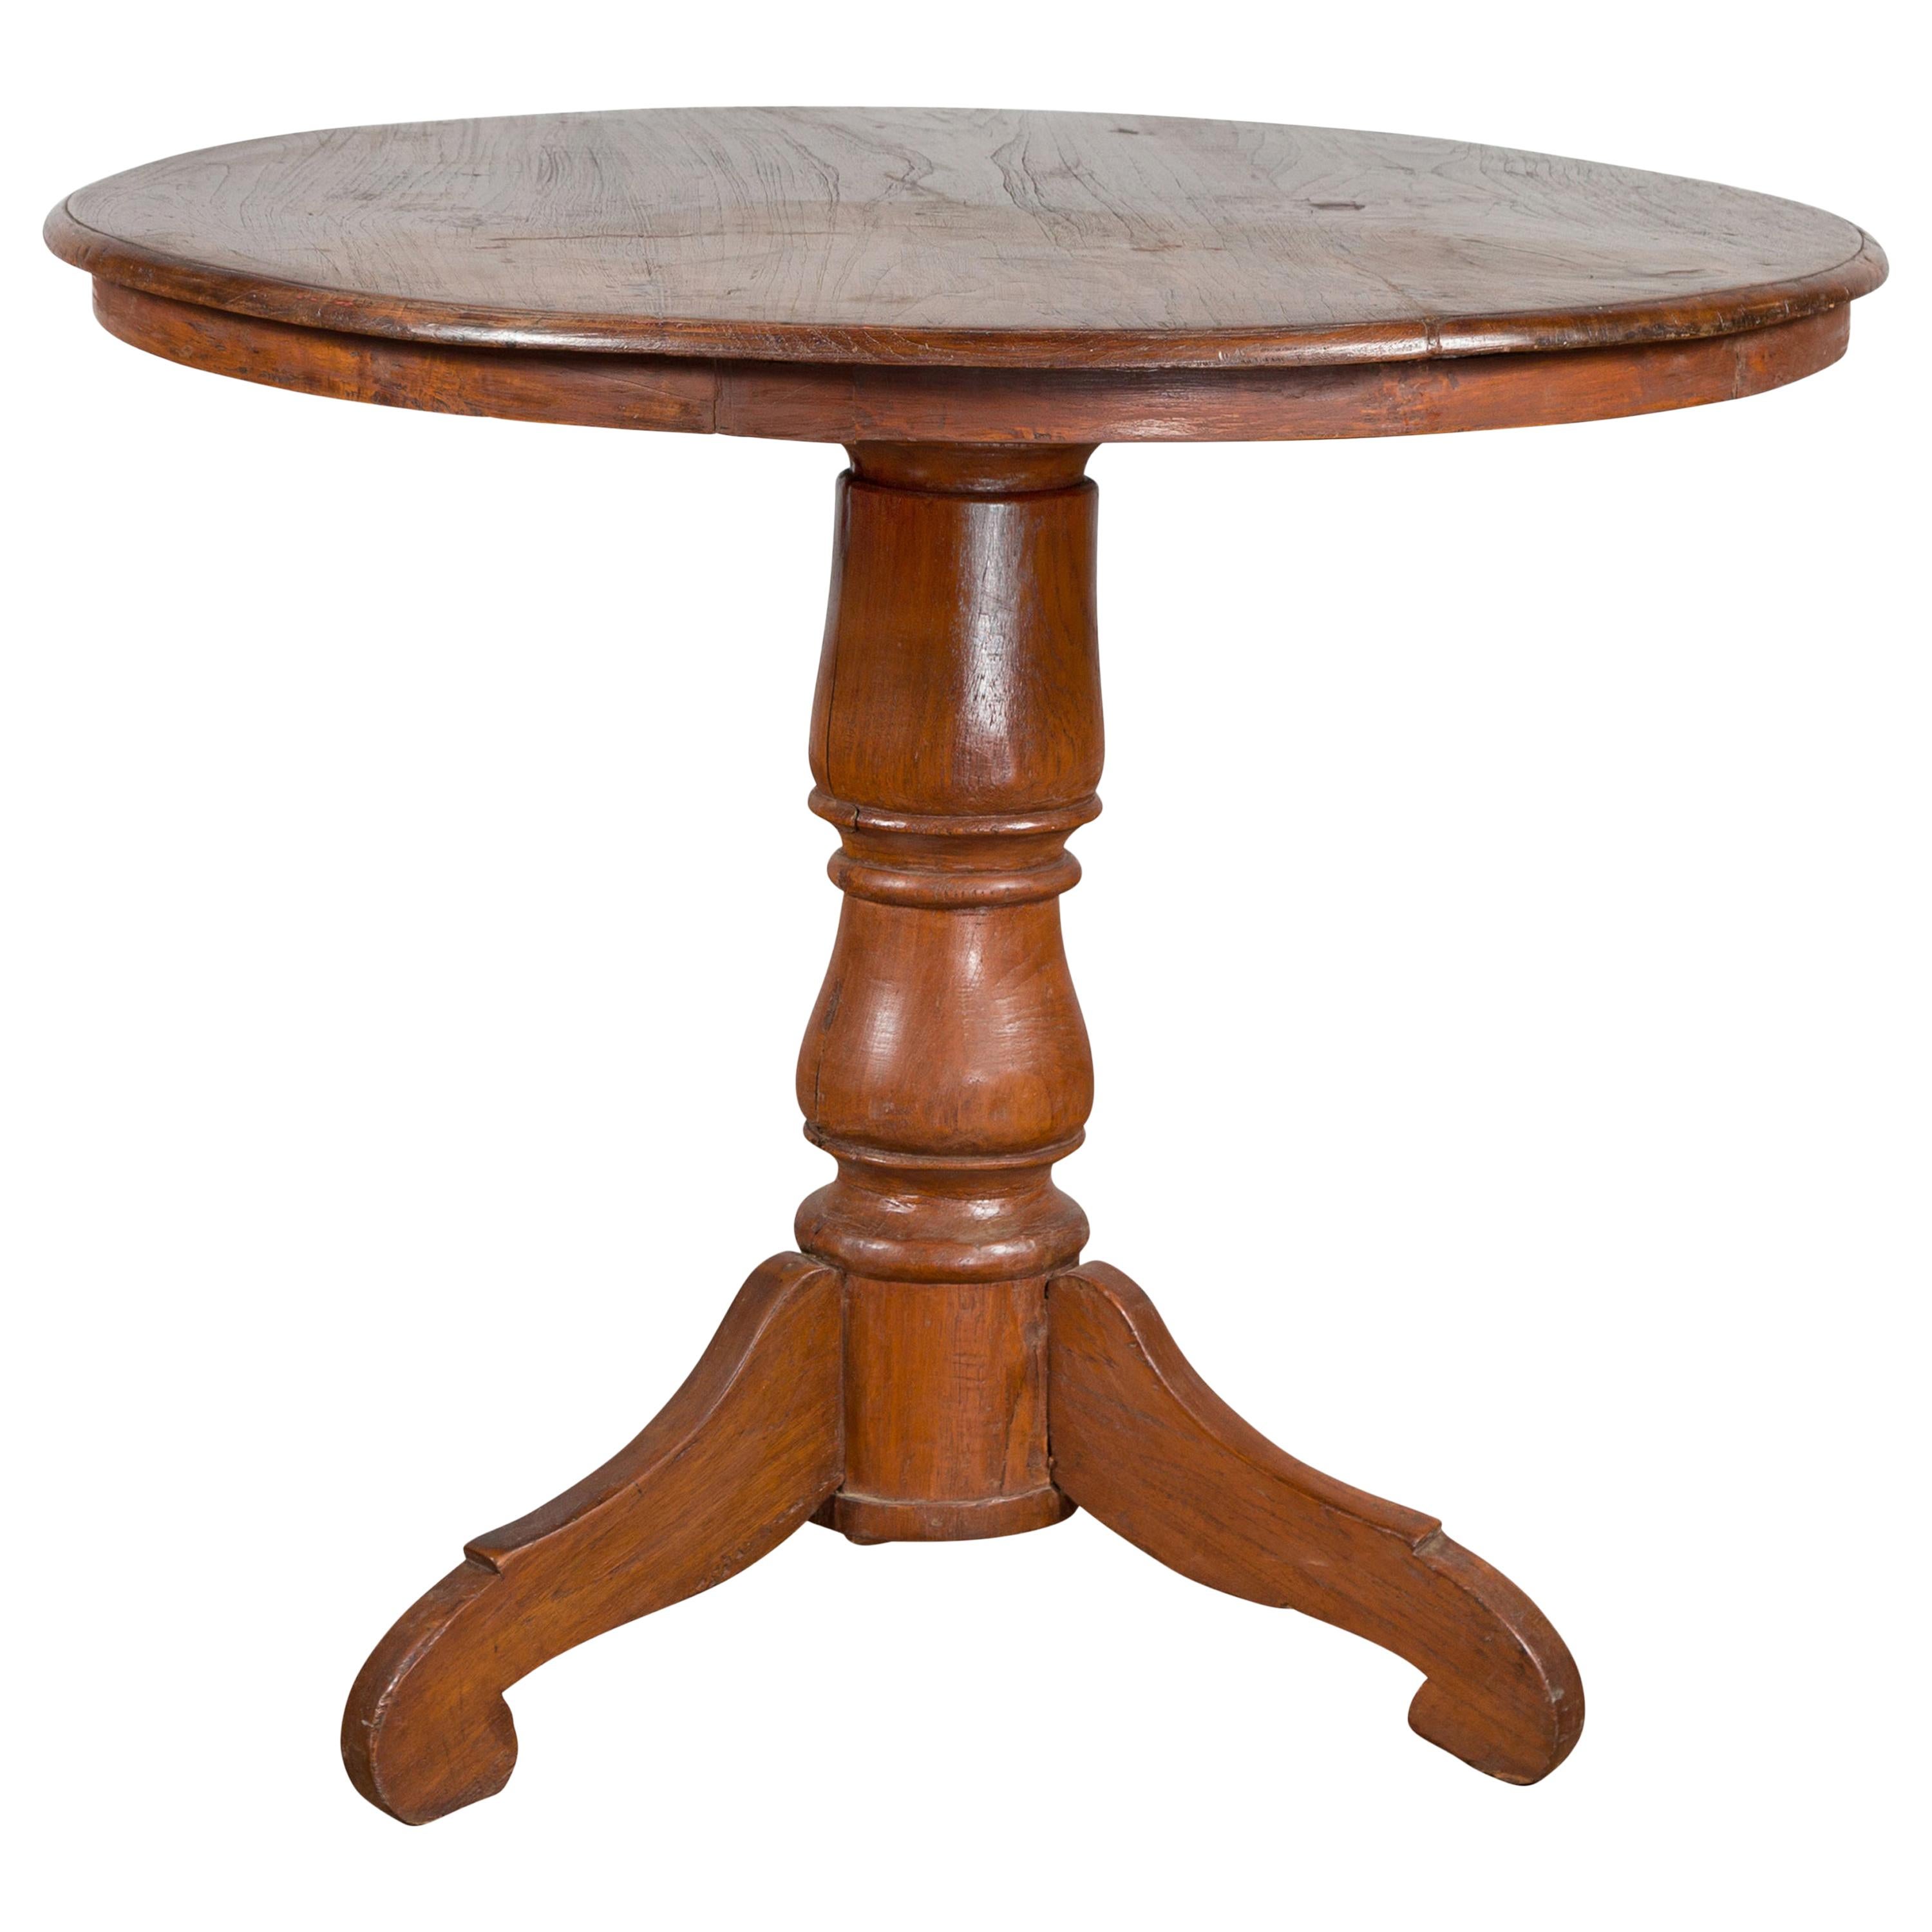 Vintage Dutch Colonial Indonesian Round Top Pedestal Table with Tripod Base